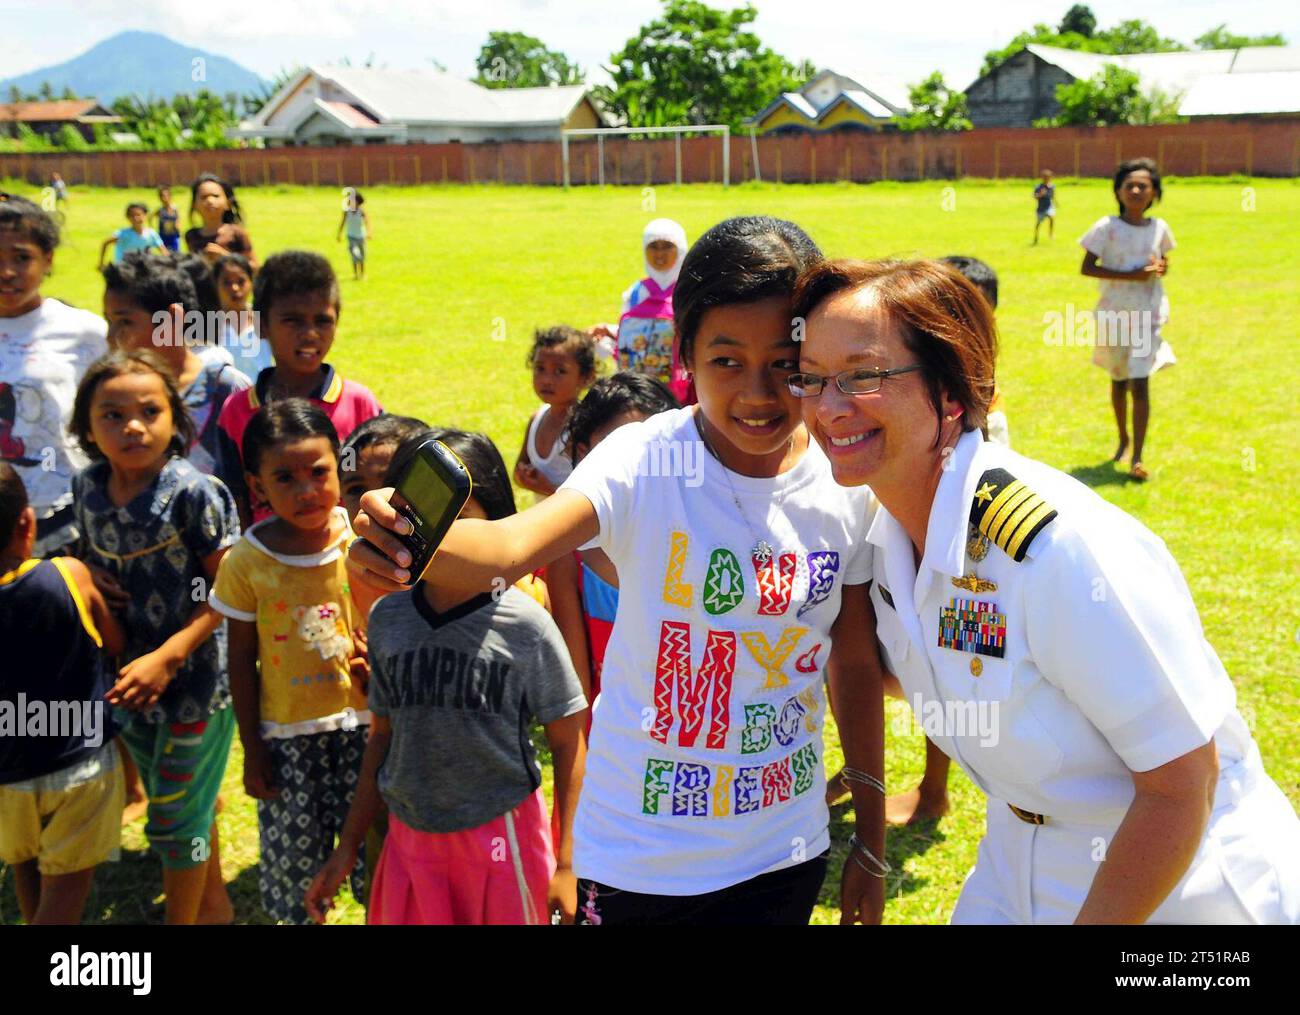 1007136410J-019  TOBELO, Indonesia (July 13, 2010) Capt. Lisa M. Franchetti, commander of Pacific Partnership 2010, poses for a Stock Photo